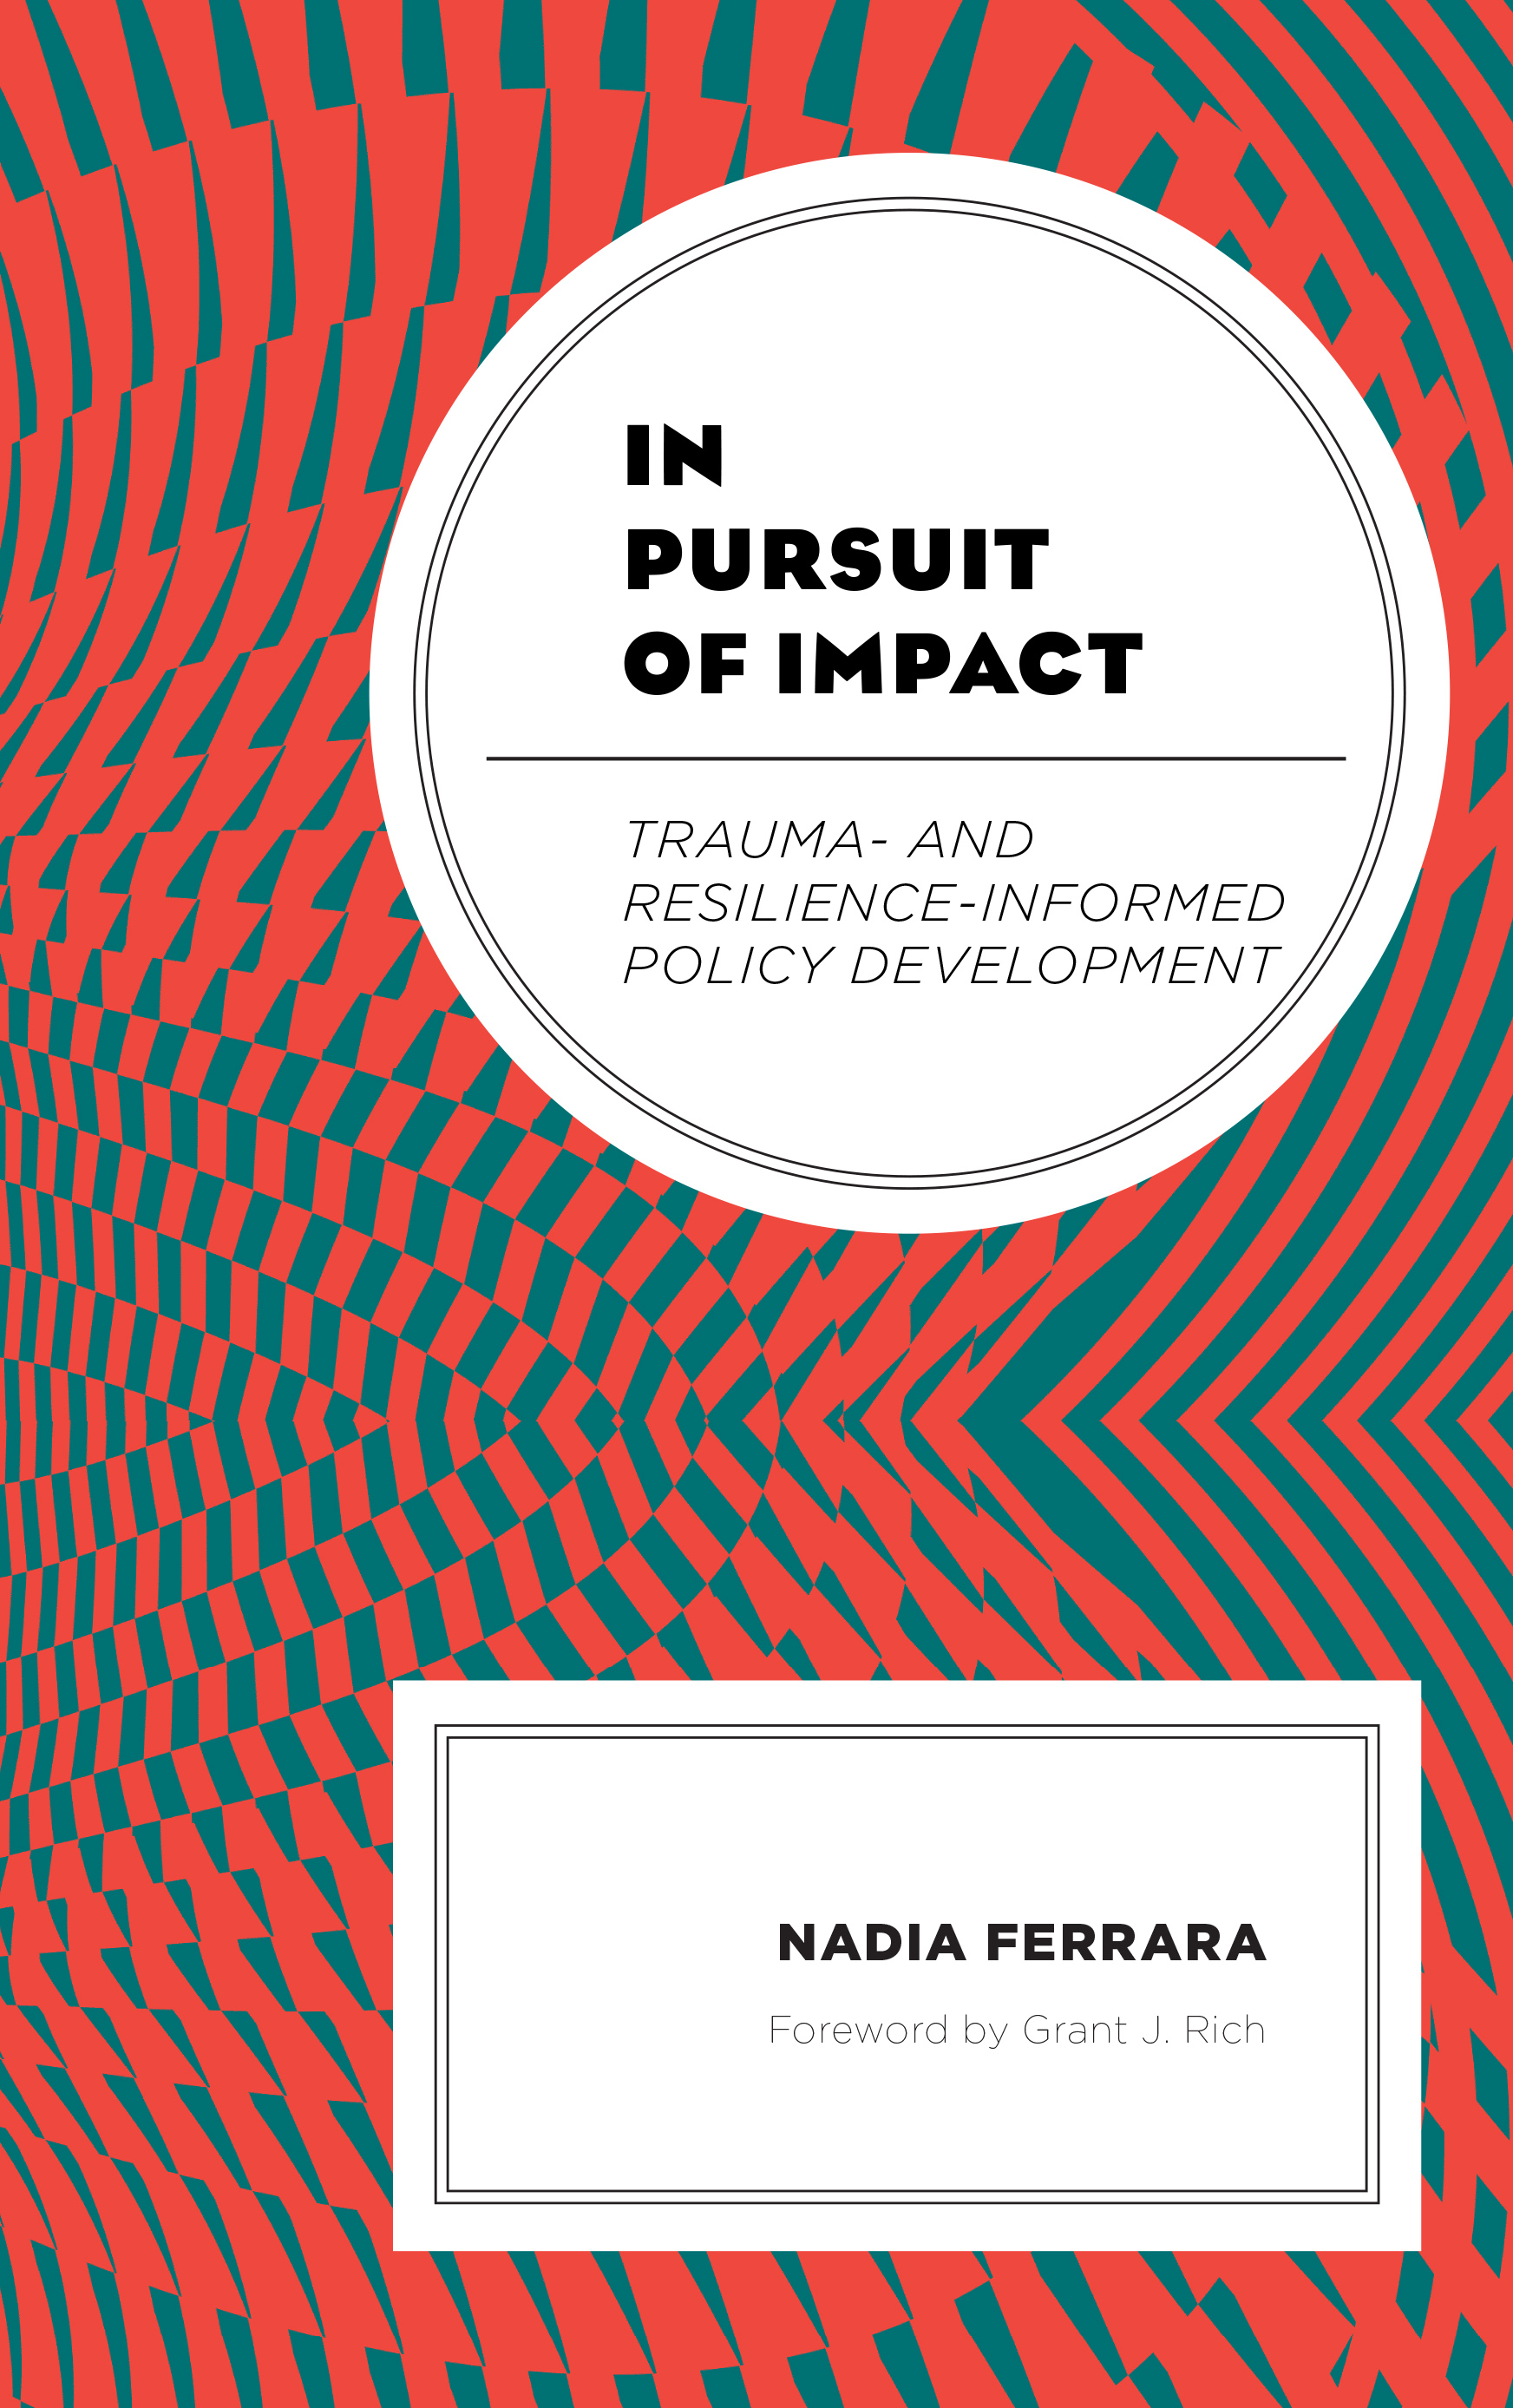 In Pursuit of Impact: Trauma- and Resilience-Informed Policy Development